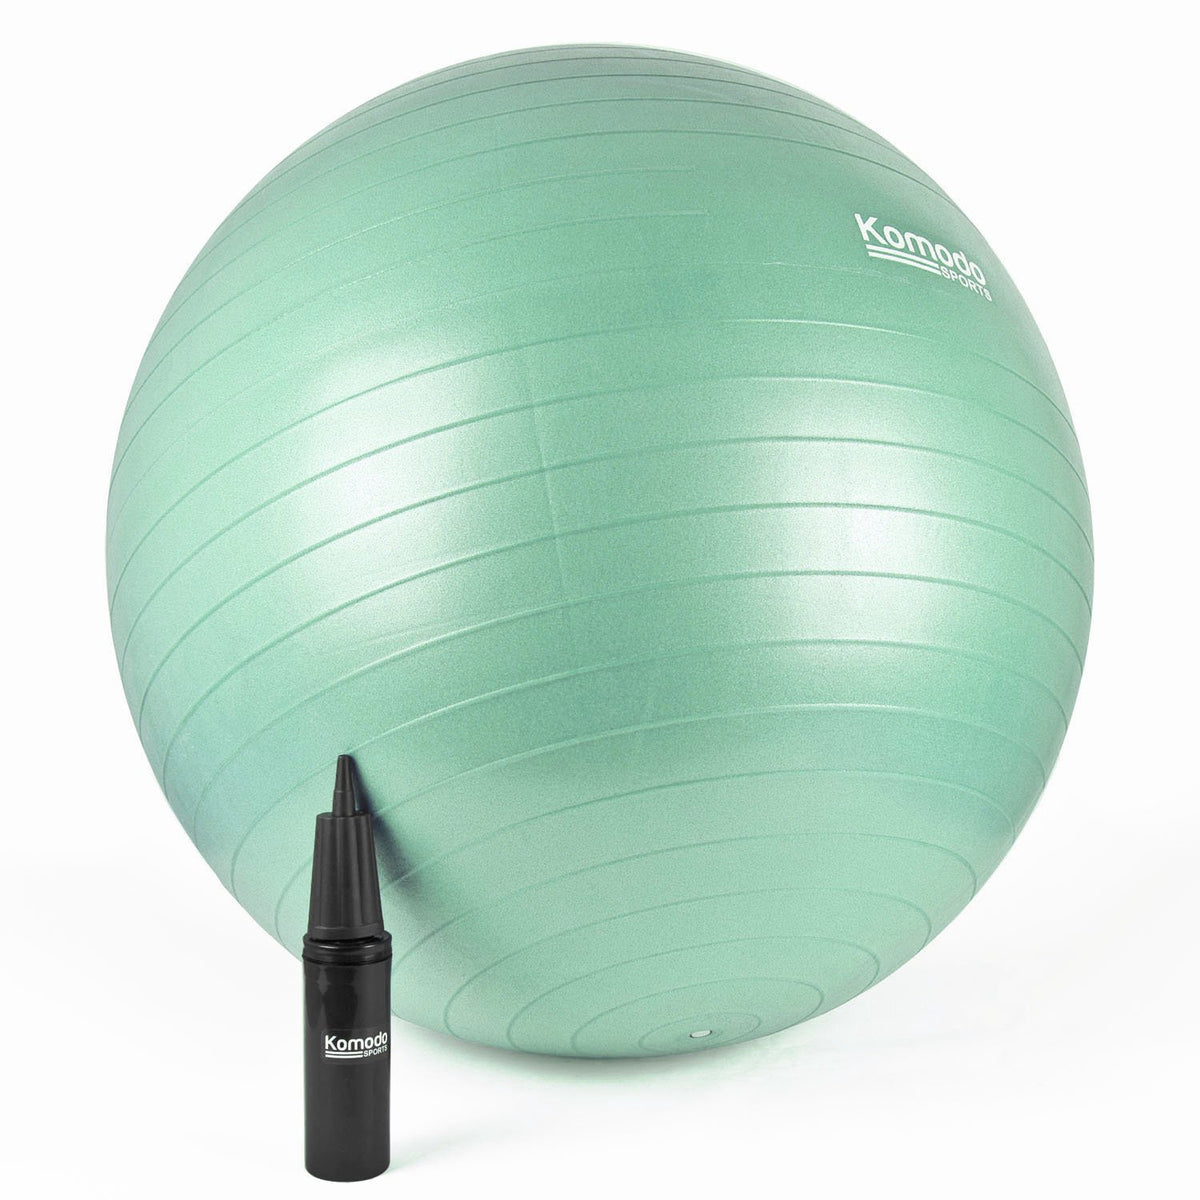 Trideer 45-85cm Exercise Ball (11 Colors) , Birthing Ball, Ball Chair, Yoga Pilate Balance Ball with Pump, Anti-Slip & Anti-Burst, 2000lbs Extra Thick Core Cross Training Ball for Office and Home